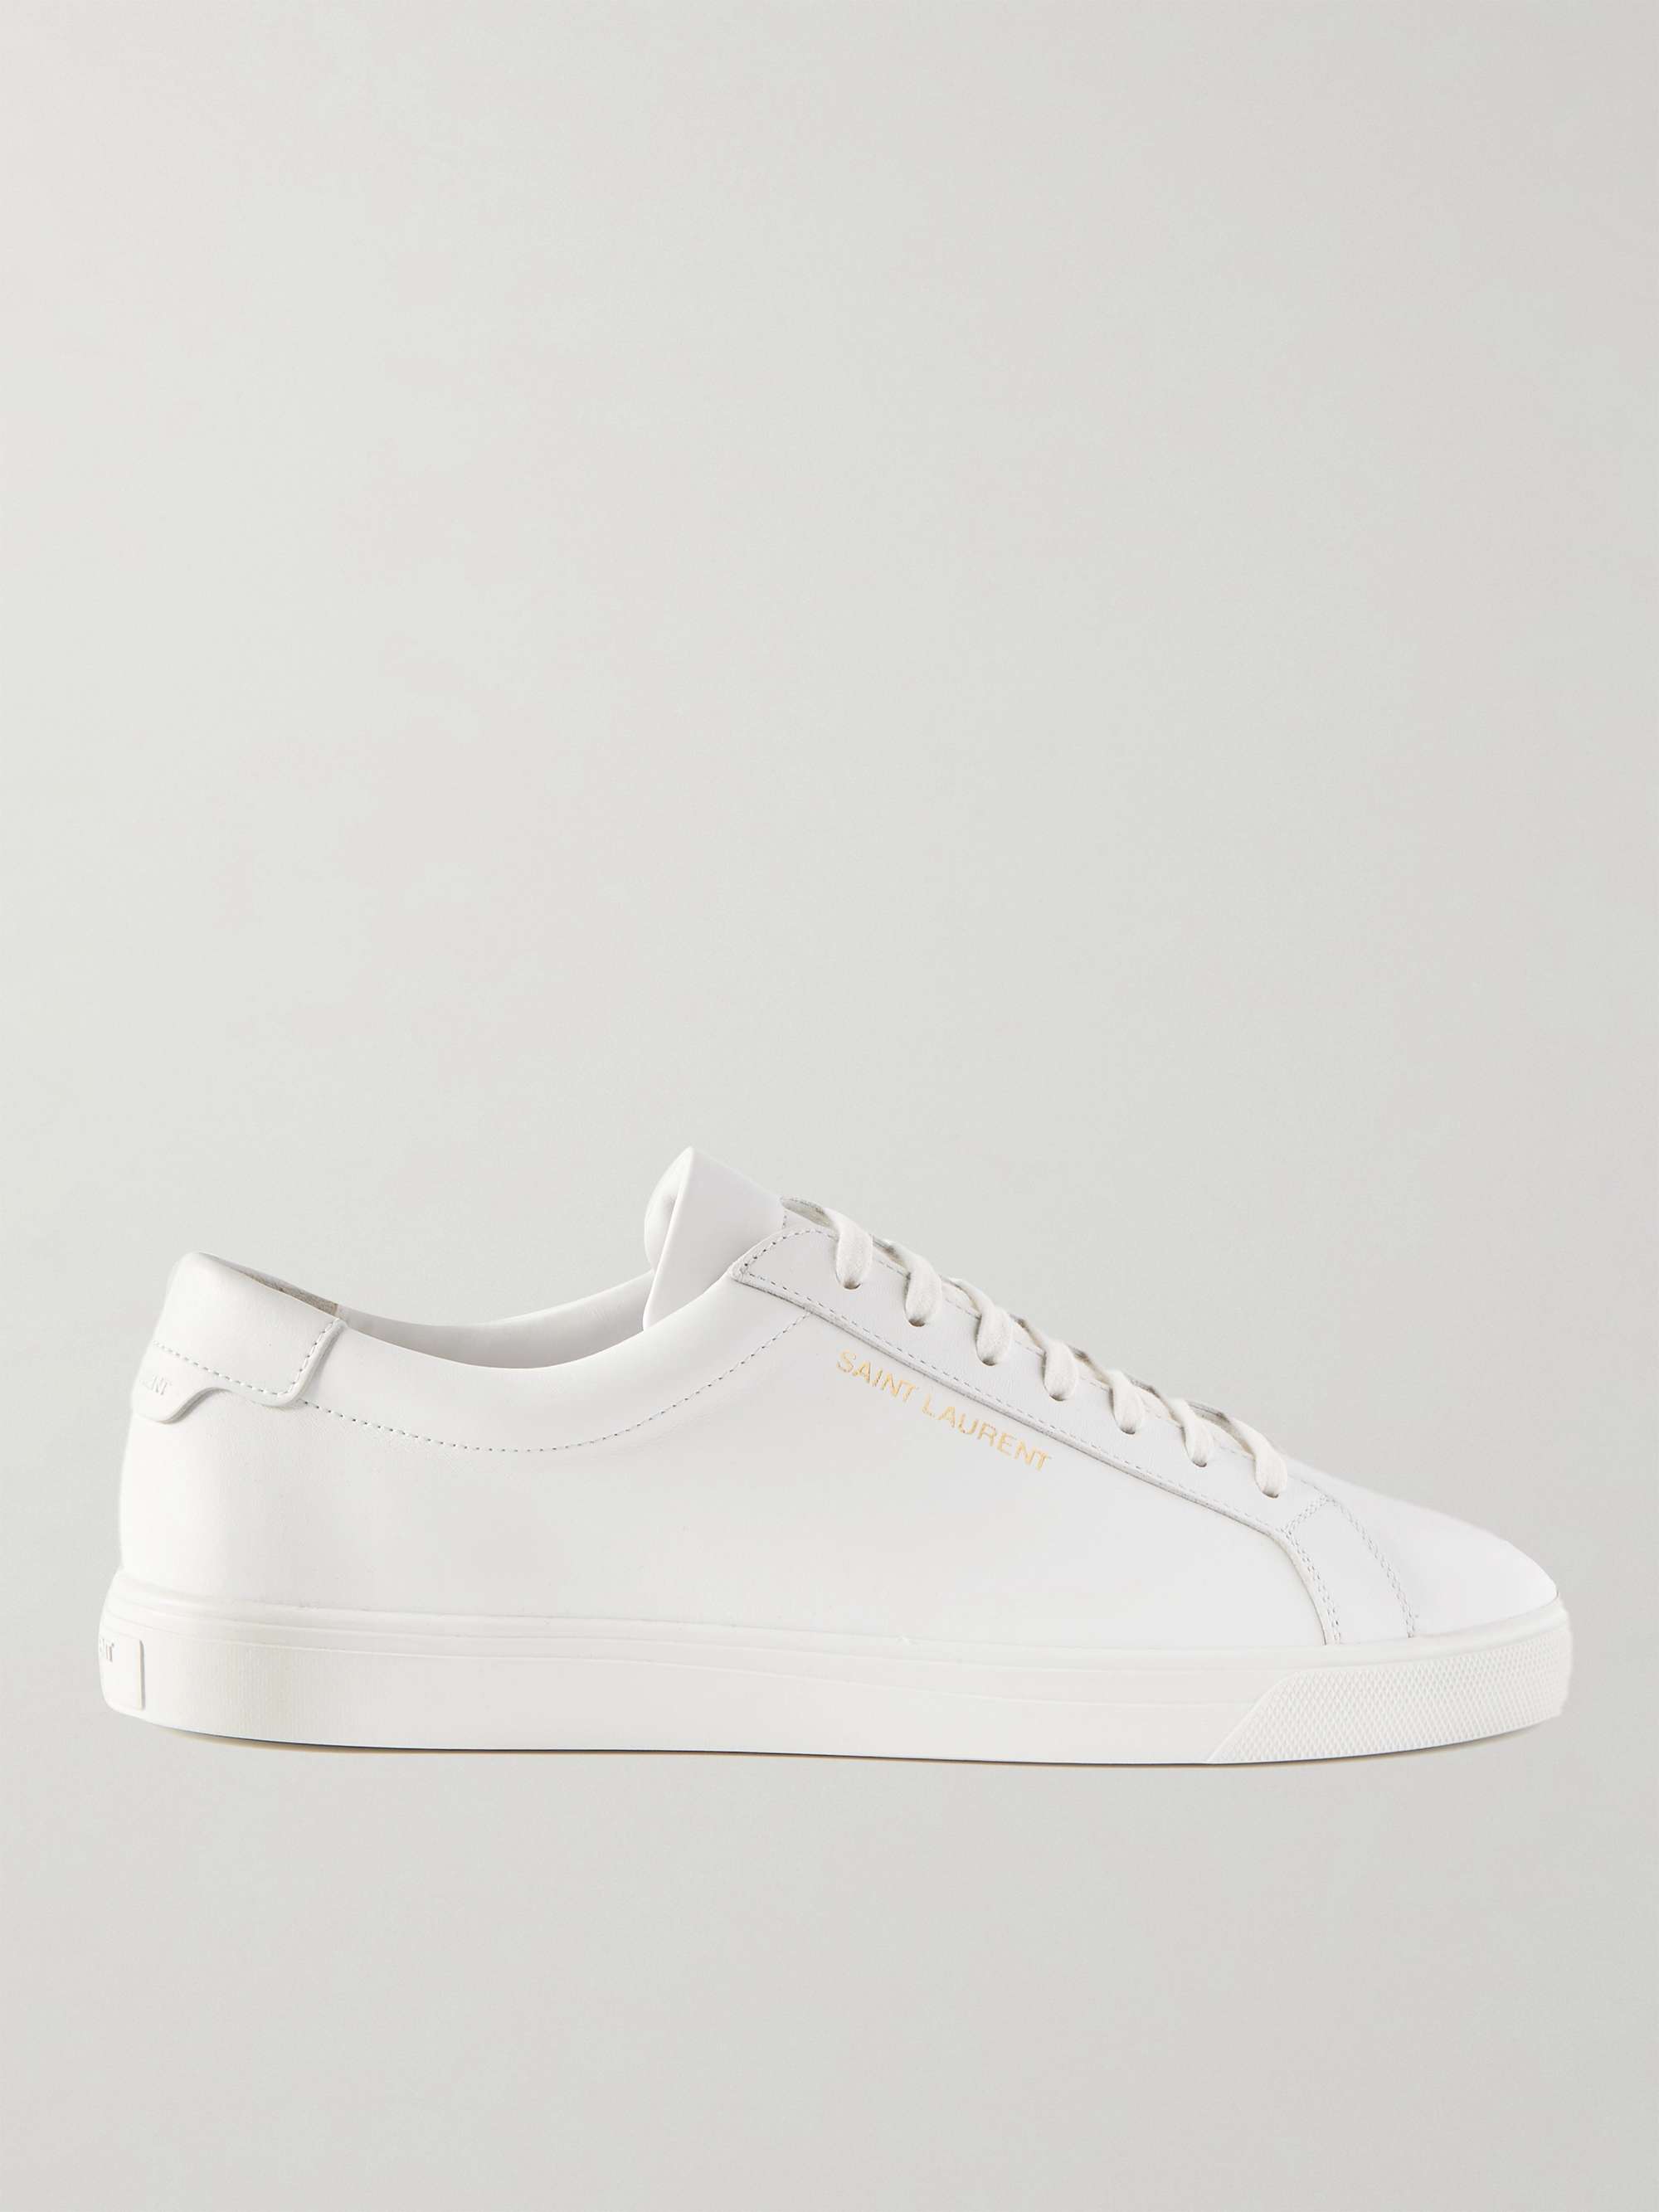 SAINT LAURENT Andy Leather Sneakers for Men | MR PORTER